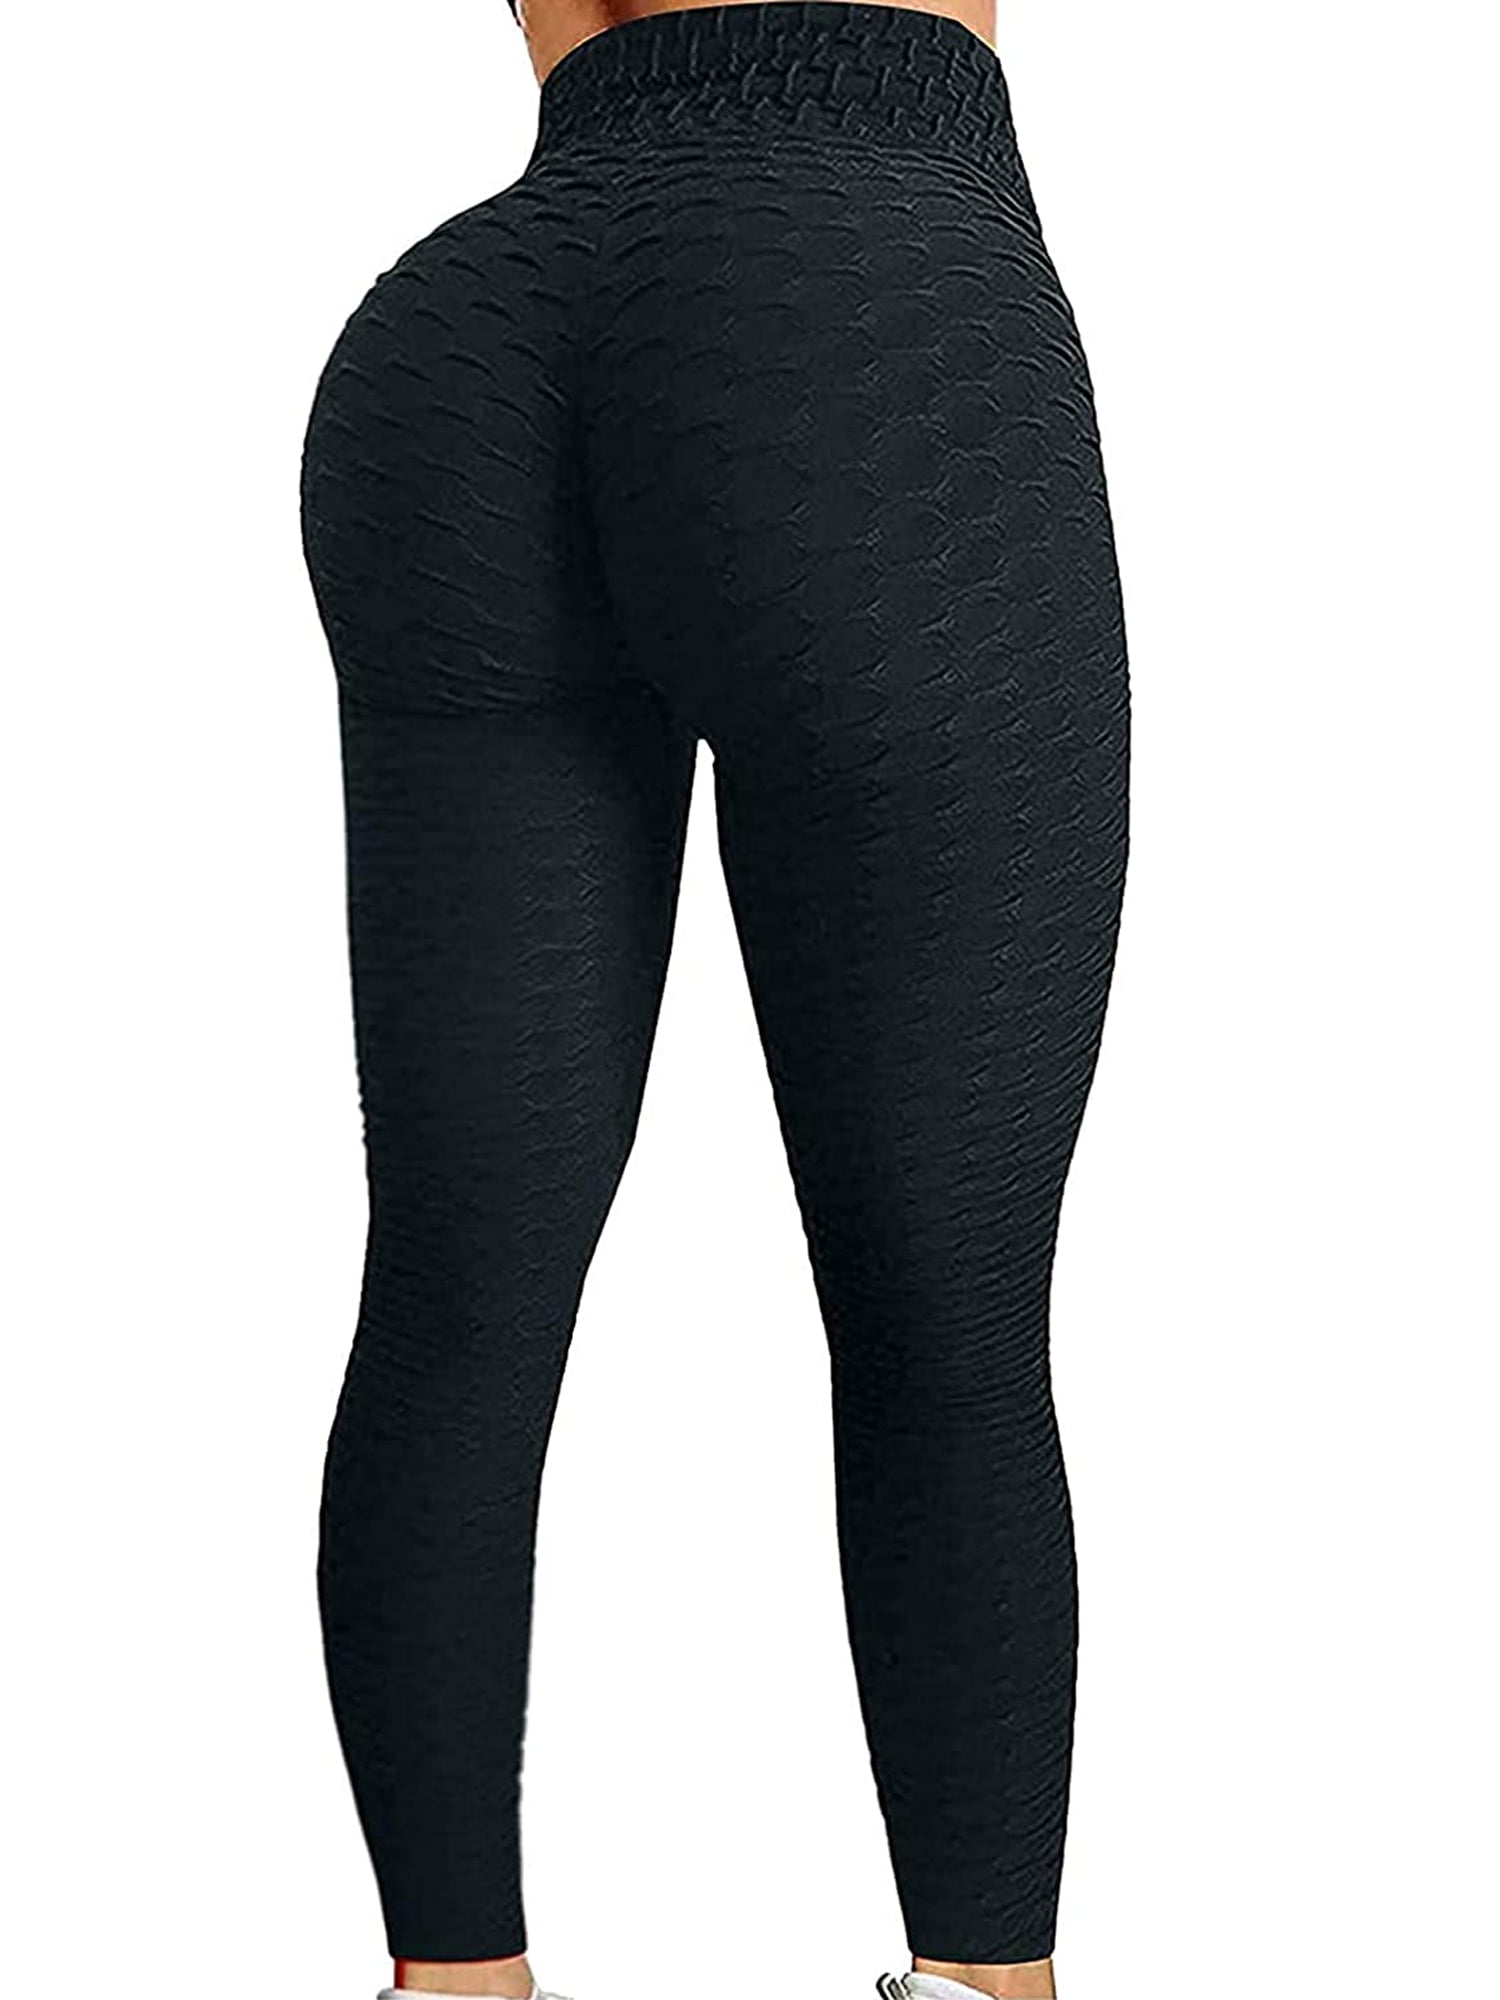 Qiylii High Waisted Yoga Pants for Women, Tummy Control Ruched Bubble Hip  Butt Lifting Workout Tight Seamless Booty Leggings